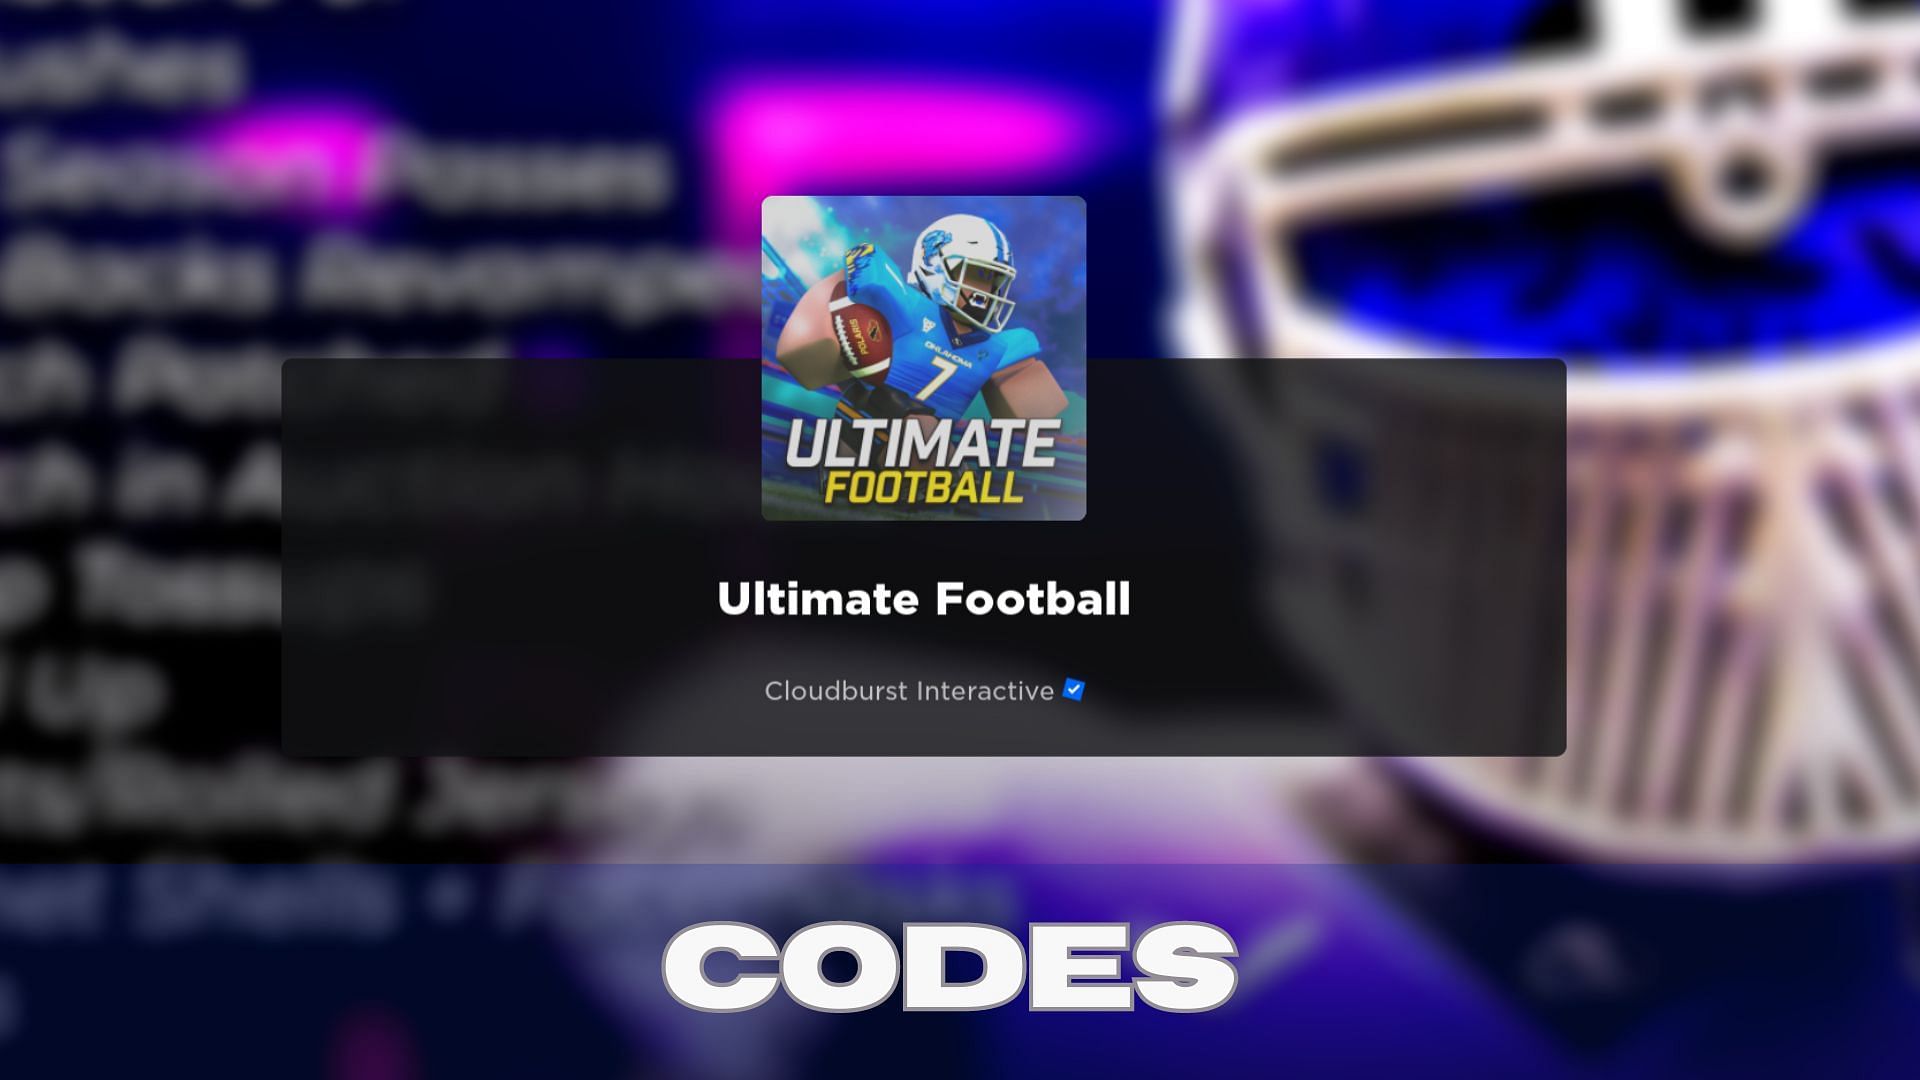 Ultimate Football title screen with codes 